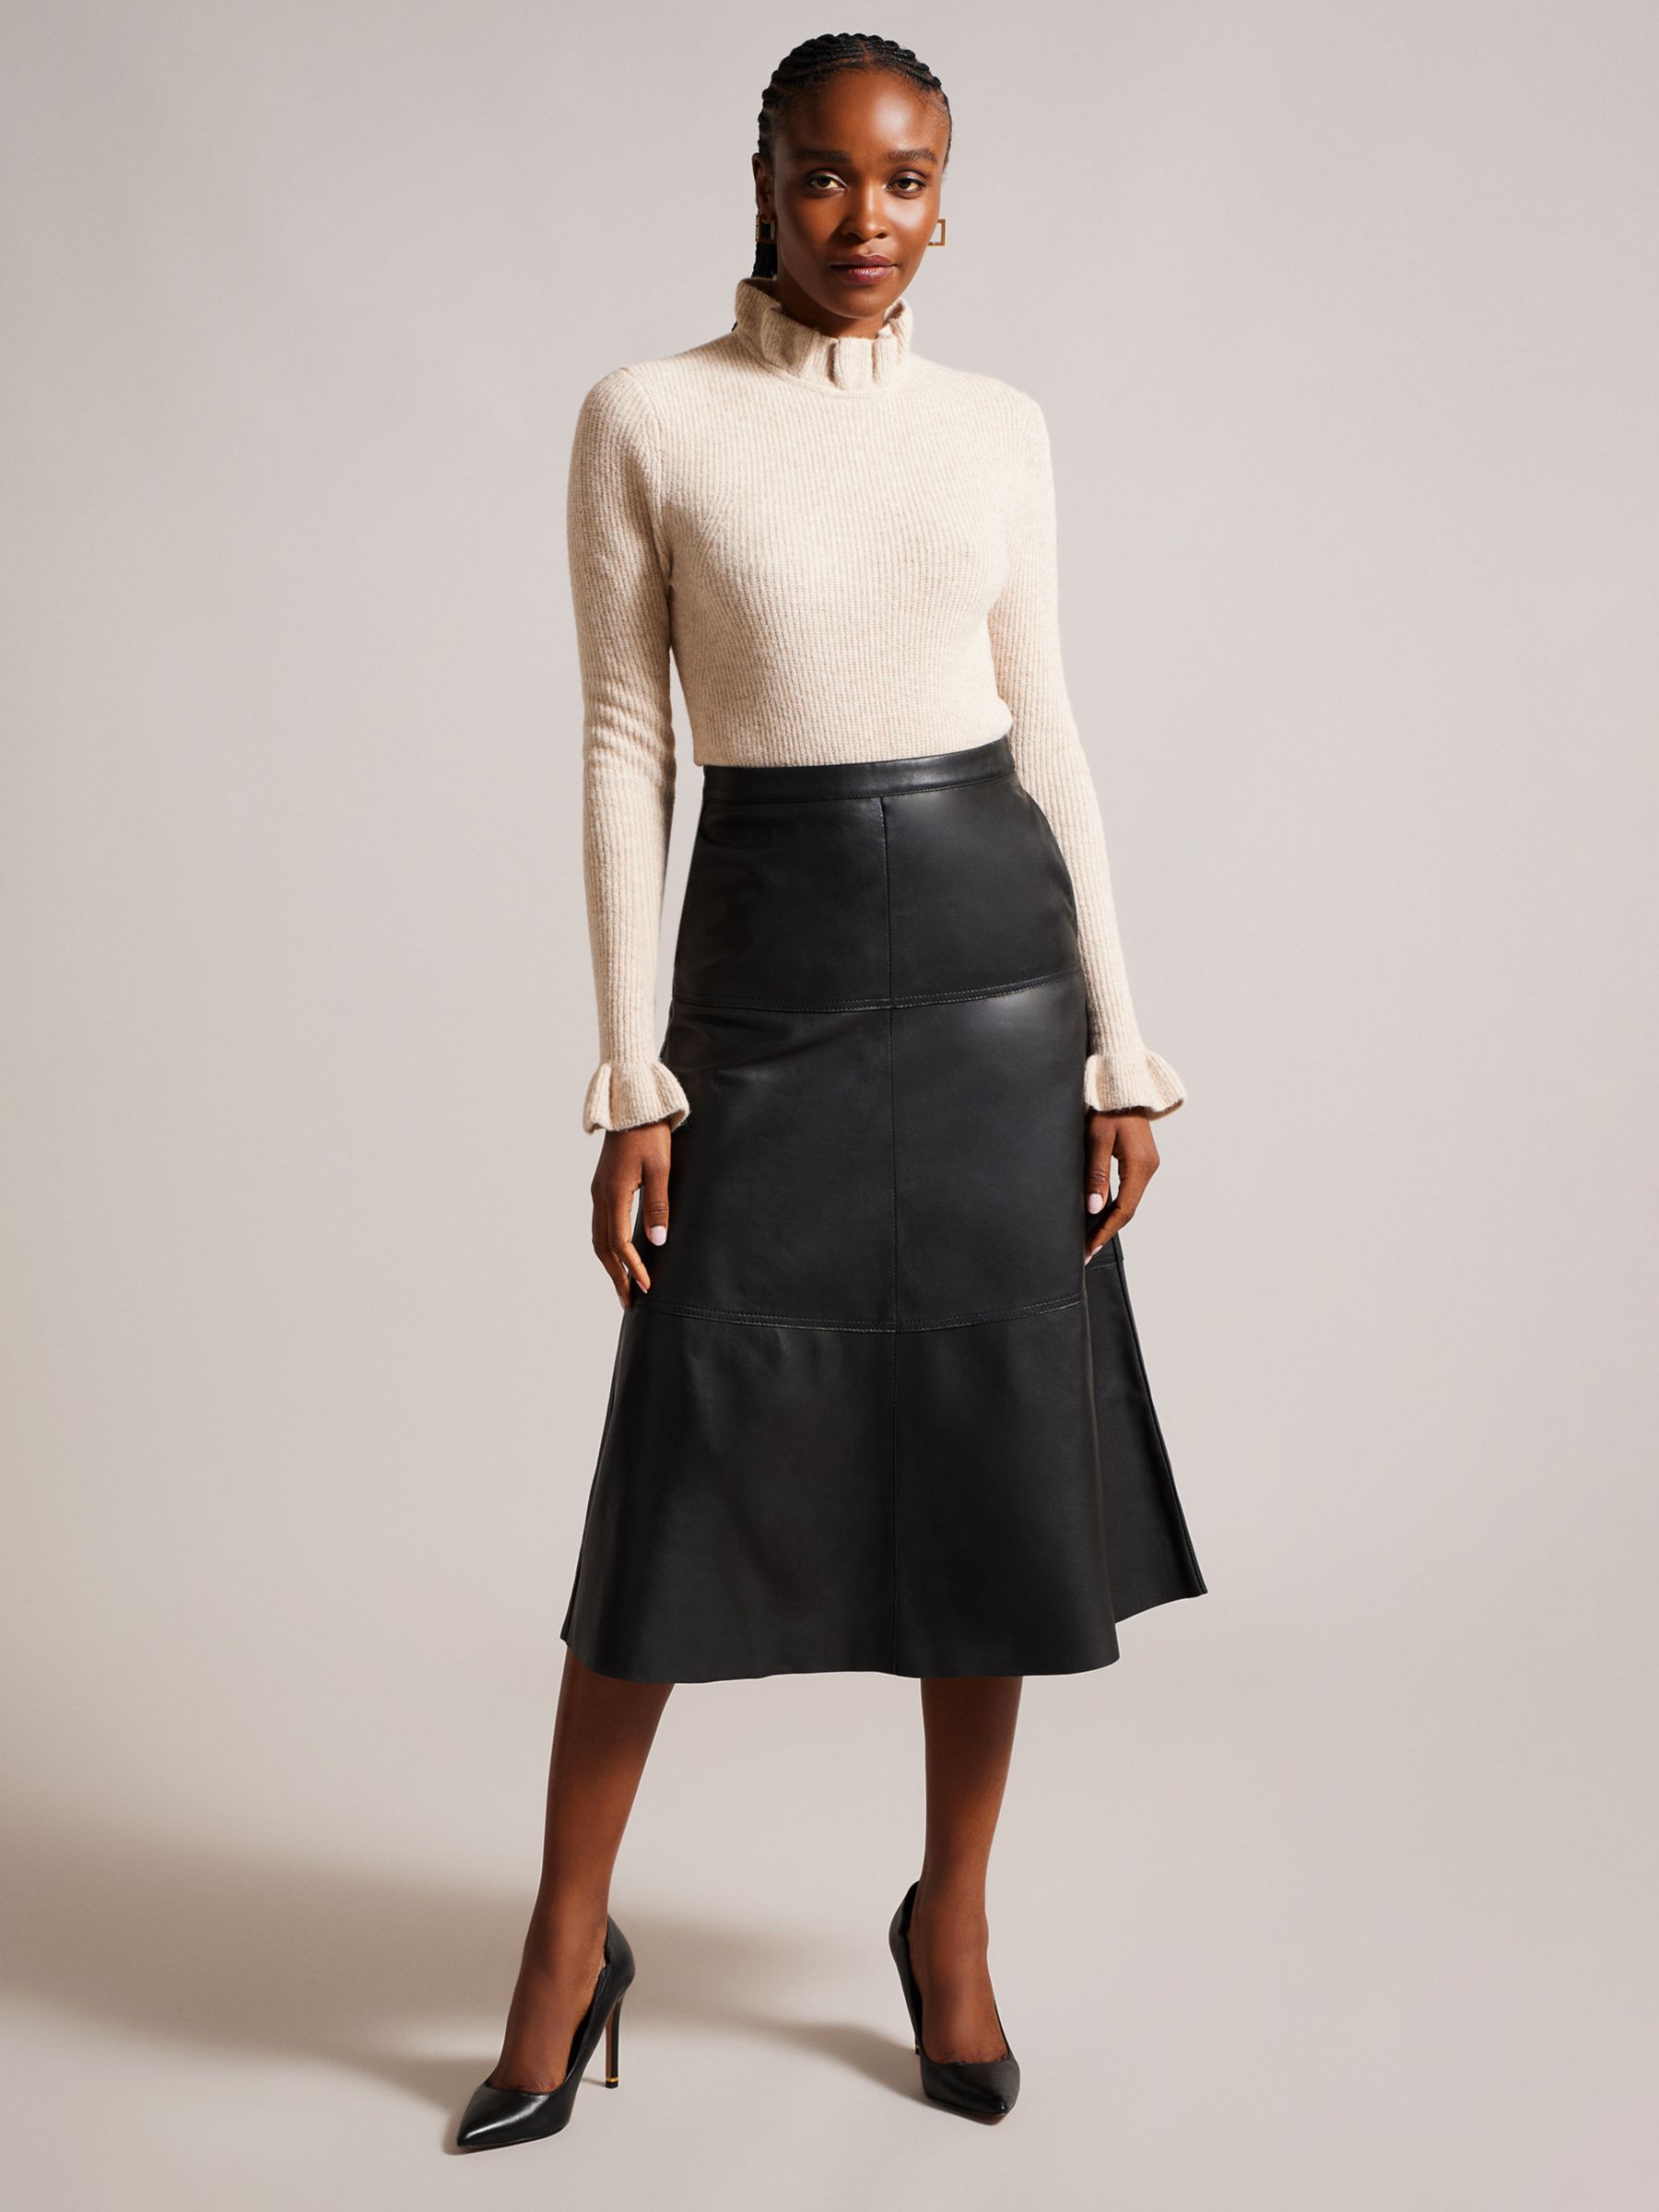 Ted Baker Oaklyna Leather Panelled A-Line Midi Skirt, Black at